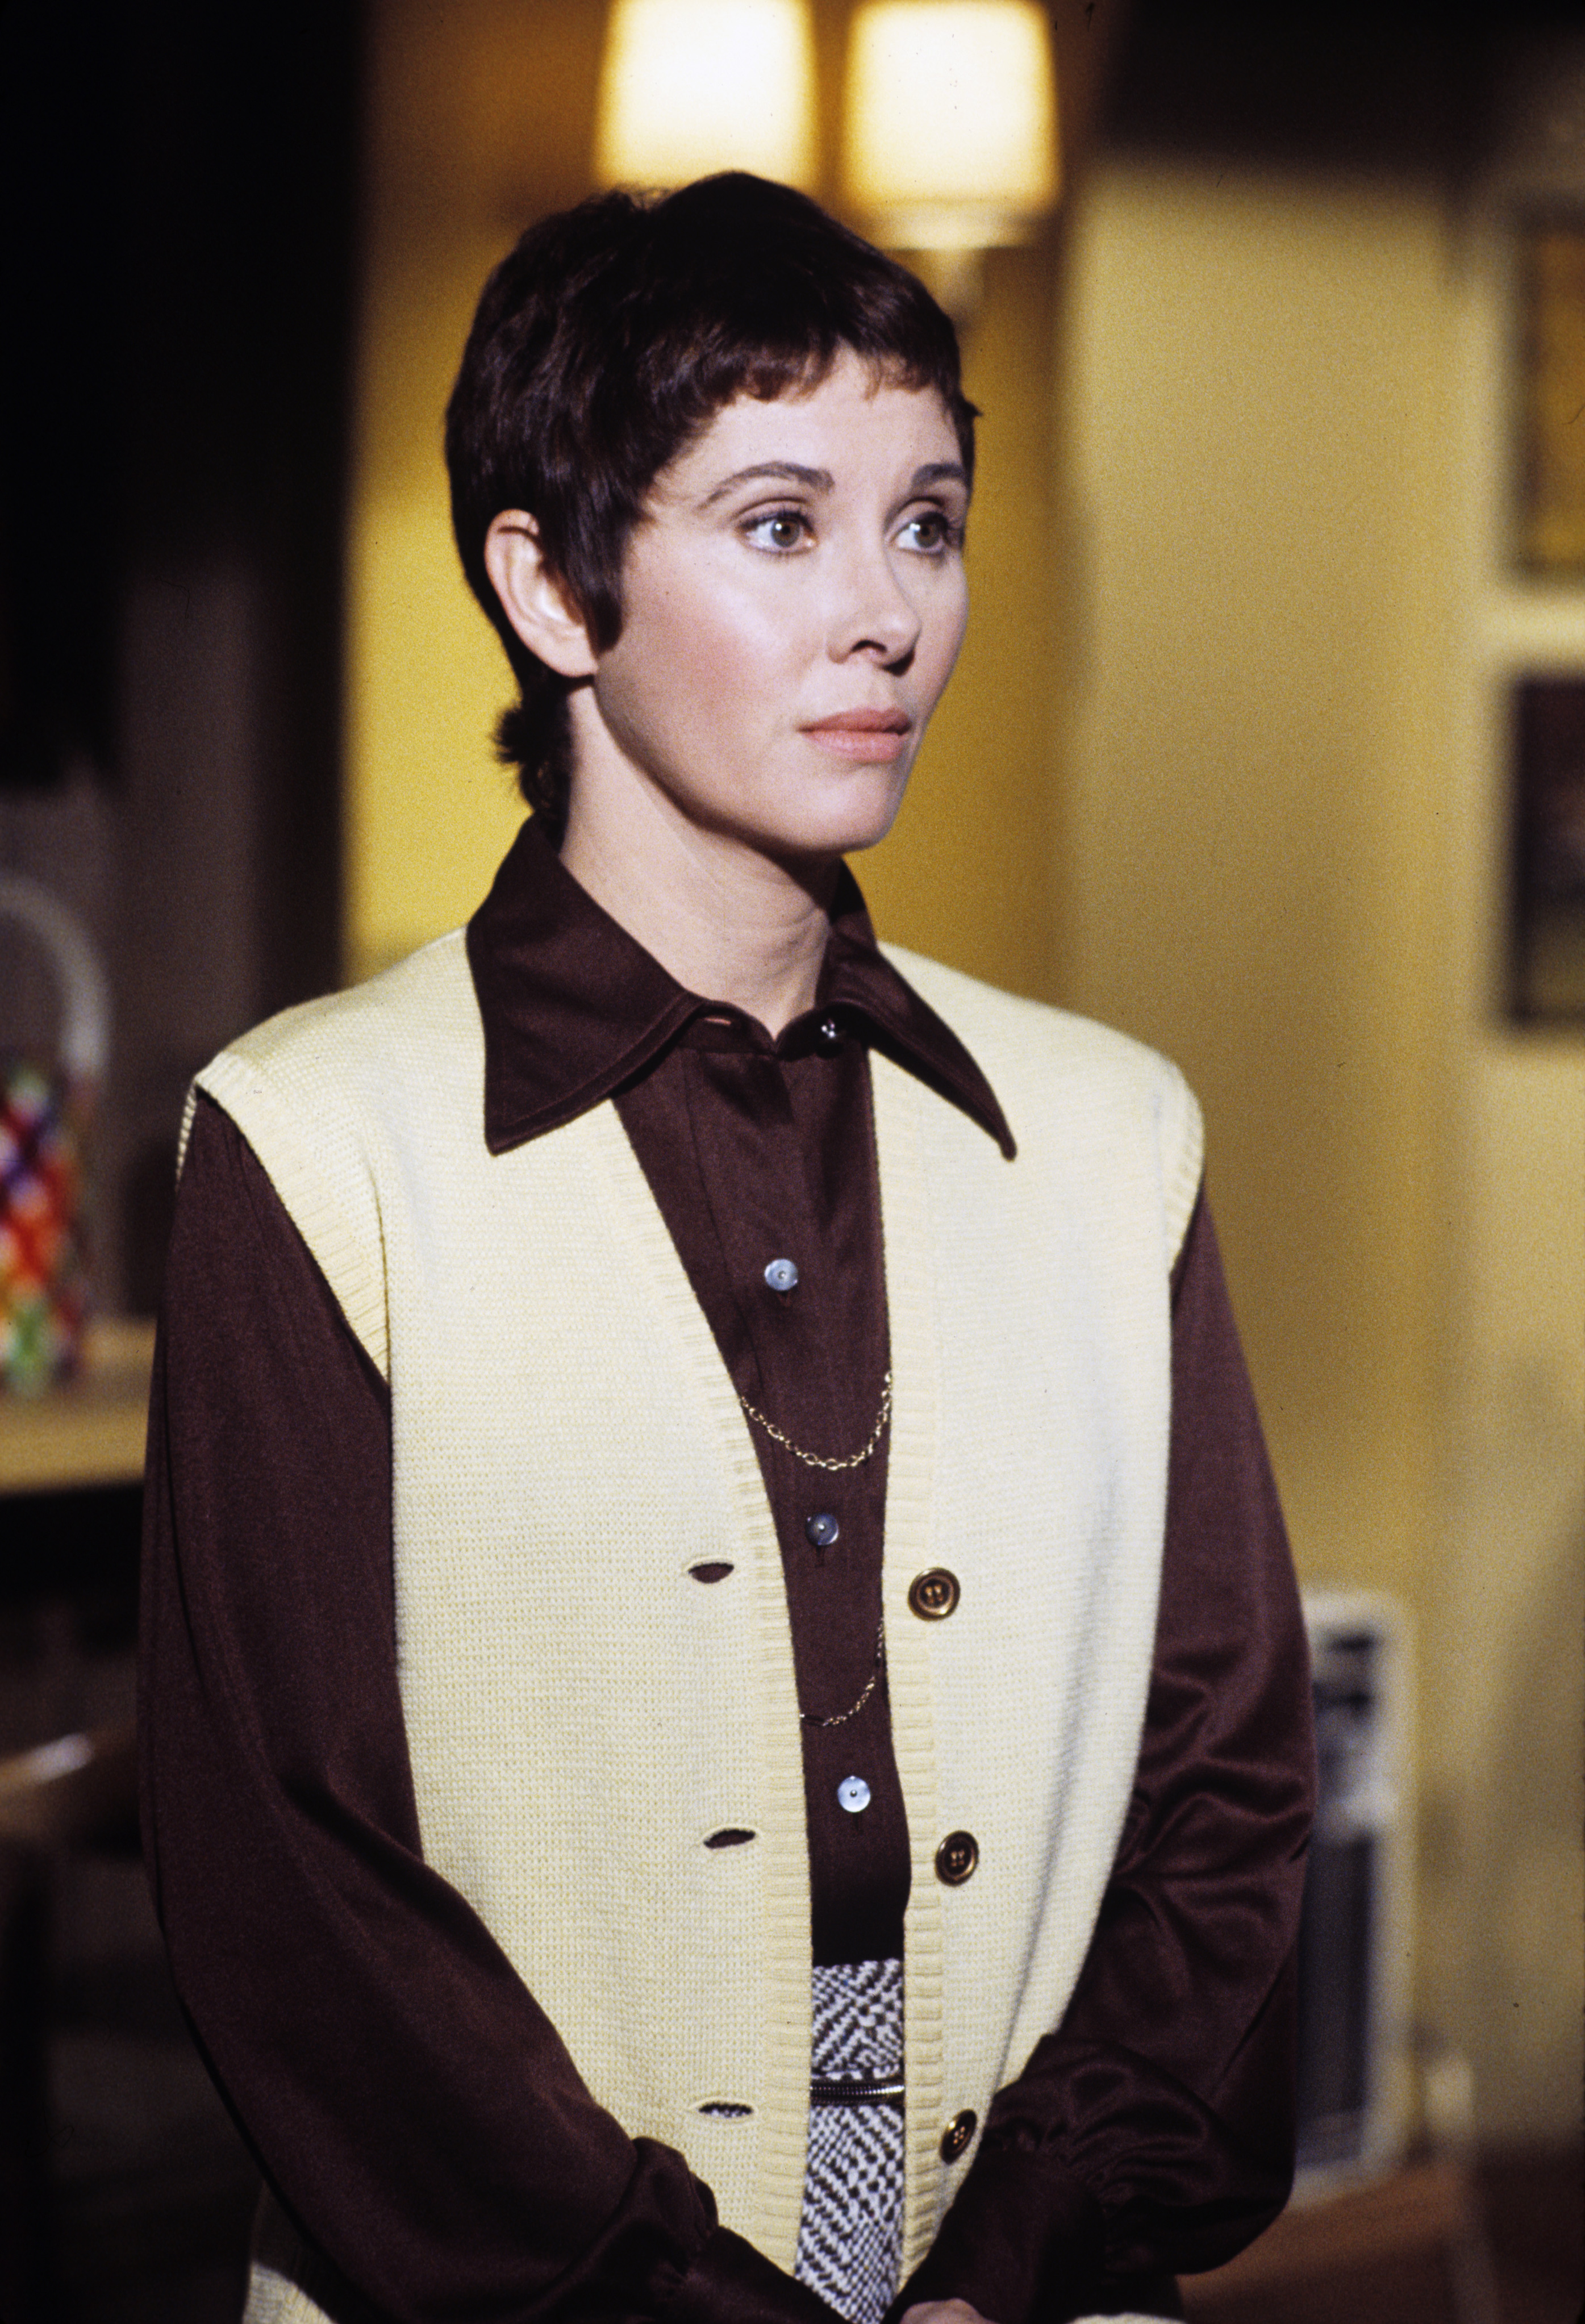 Elinor Donahue in "The Rookies" in 1974 | Source: Getty Images